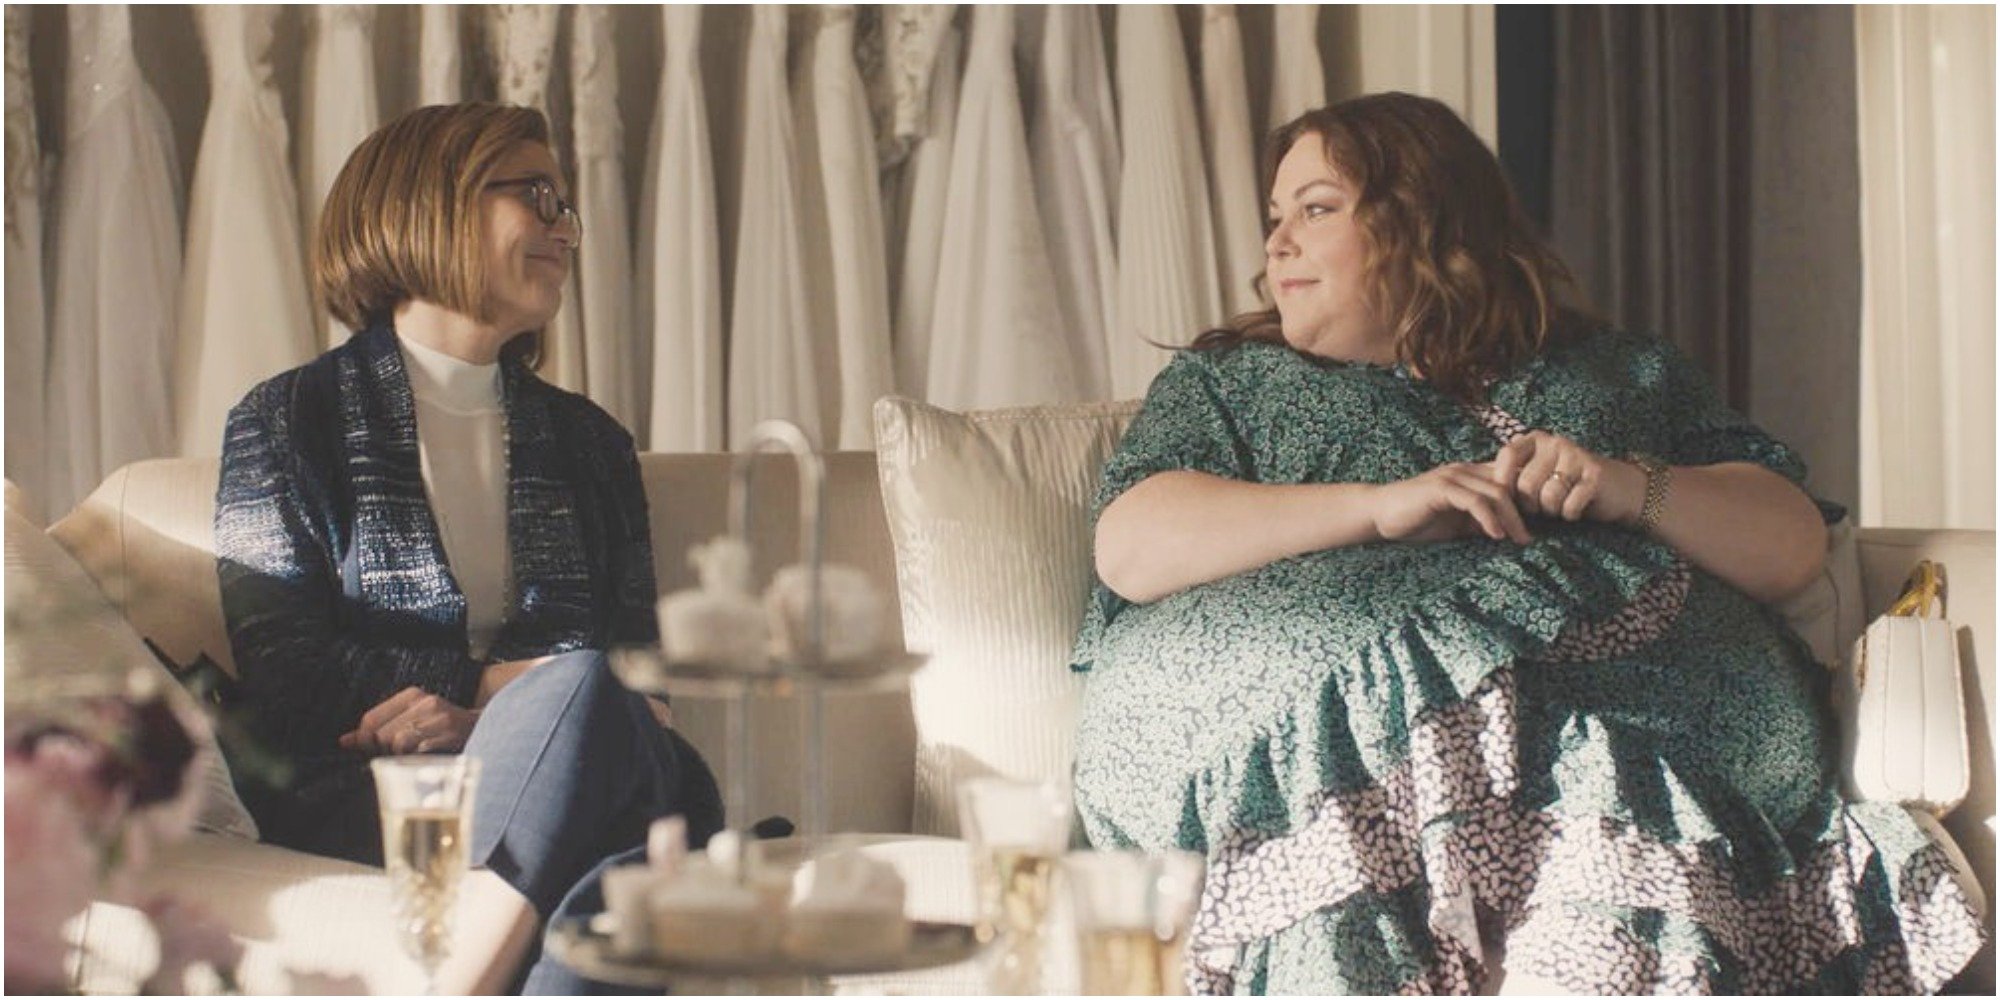 Mandy Moore and Chrissy Metz on the set of This Is Us.